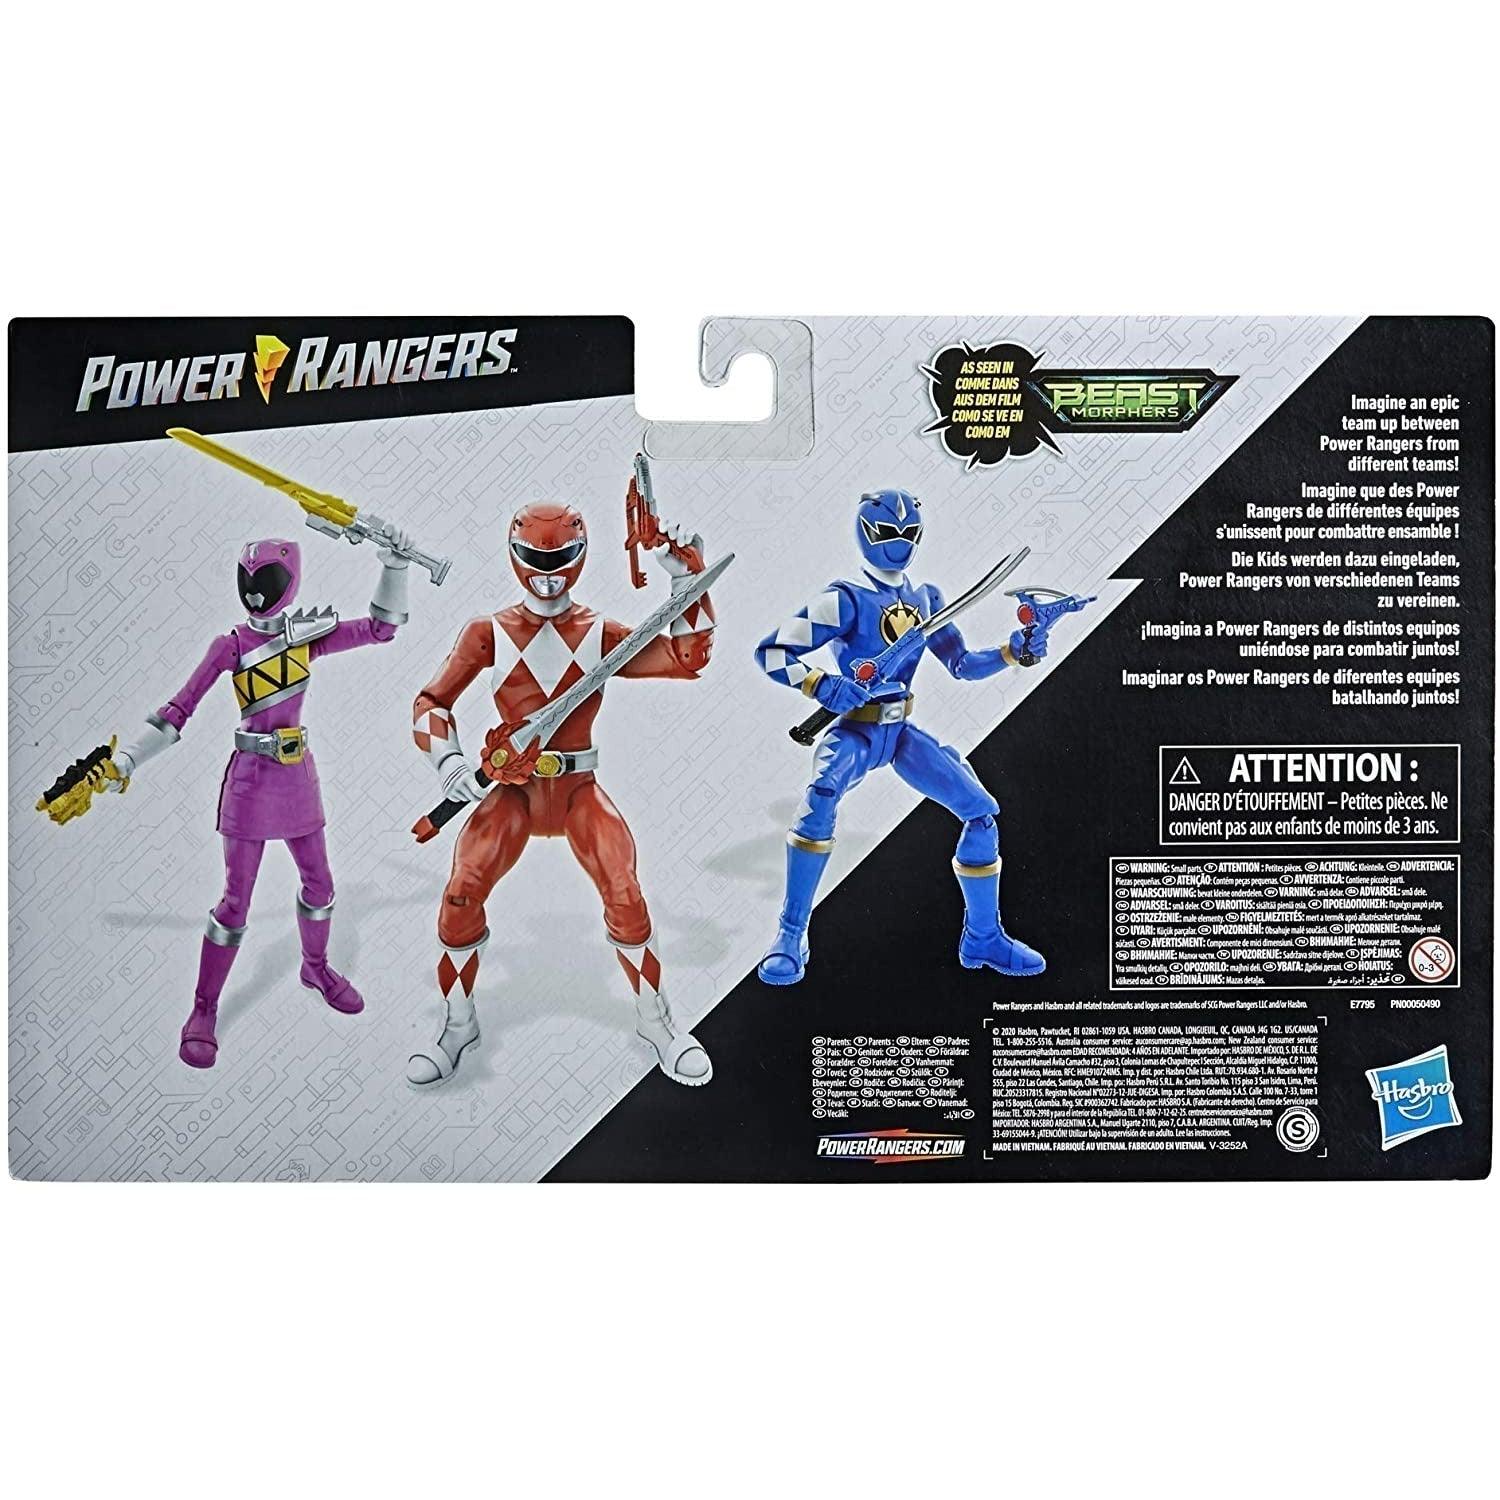 Power Rangers Beast Morphers Special Episode 3-Pack Action Figure Toys Dino Thunder Blue Ranger, Mighty Morphin Red Ranger, Dino Charge Pink Ranger - BumbleToys - 4+ Years, 5-7 Years, Action Figures, Boys, Figures, Hasbro, Power Rangers, Pre-Order